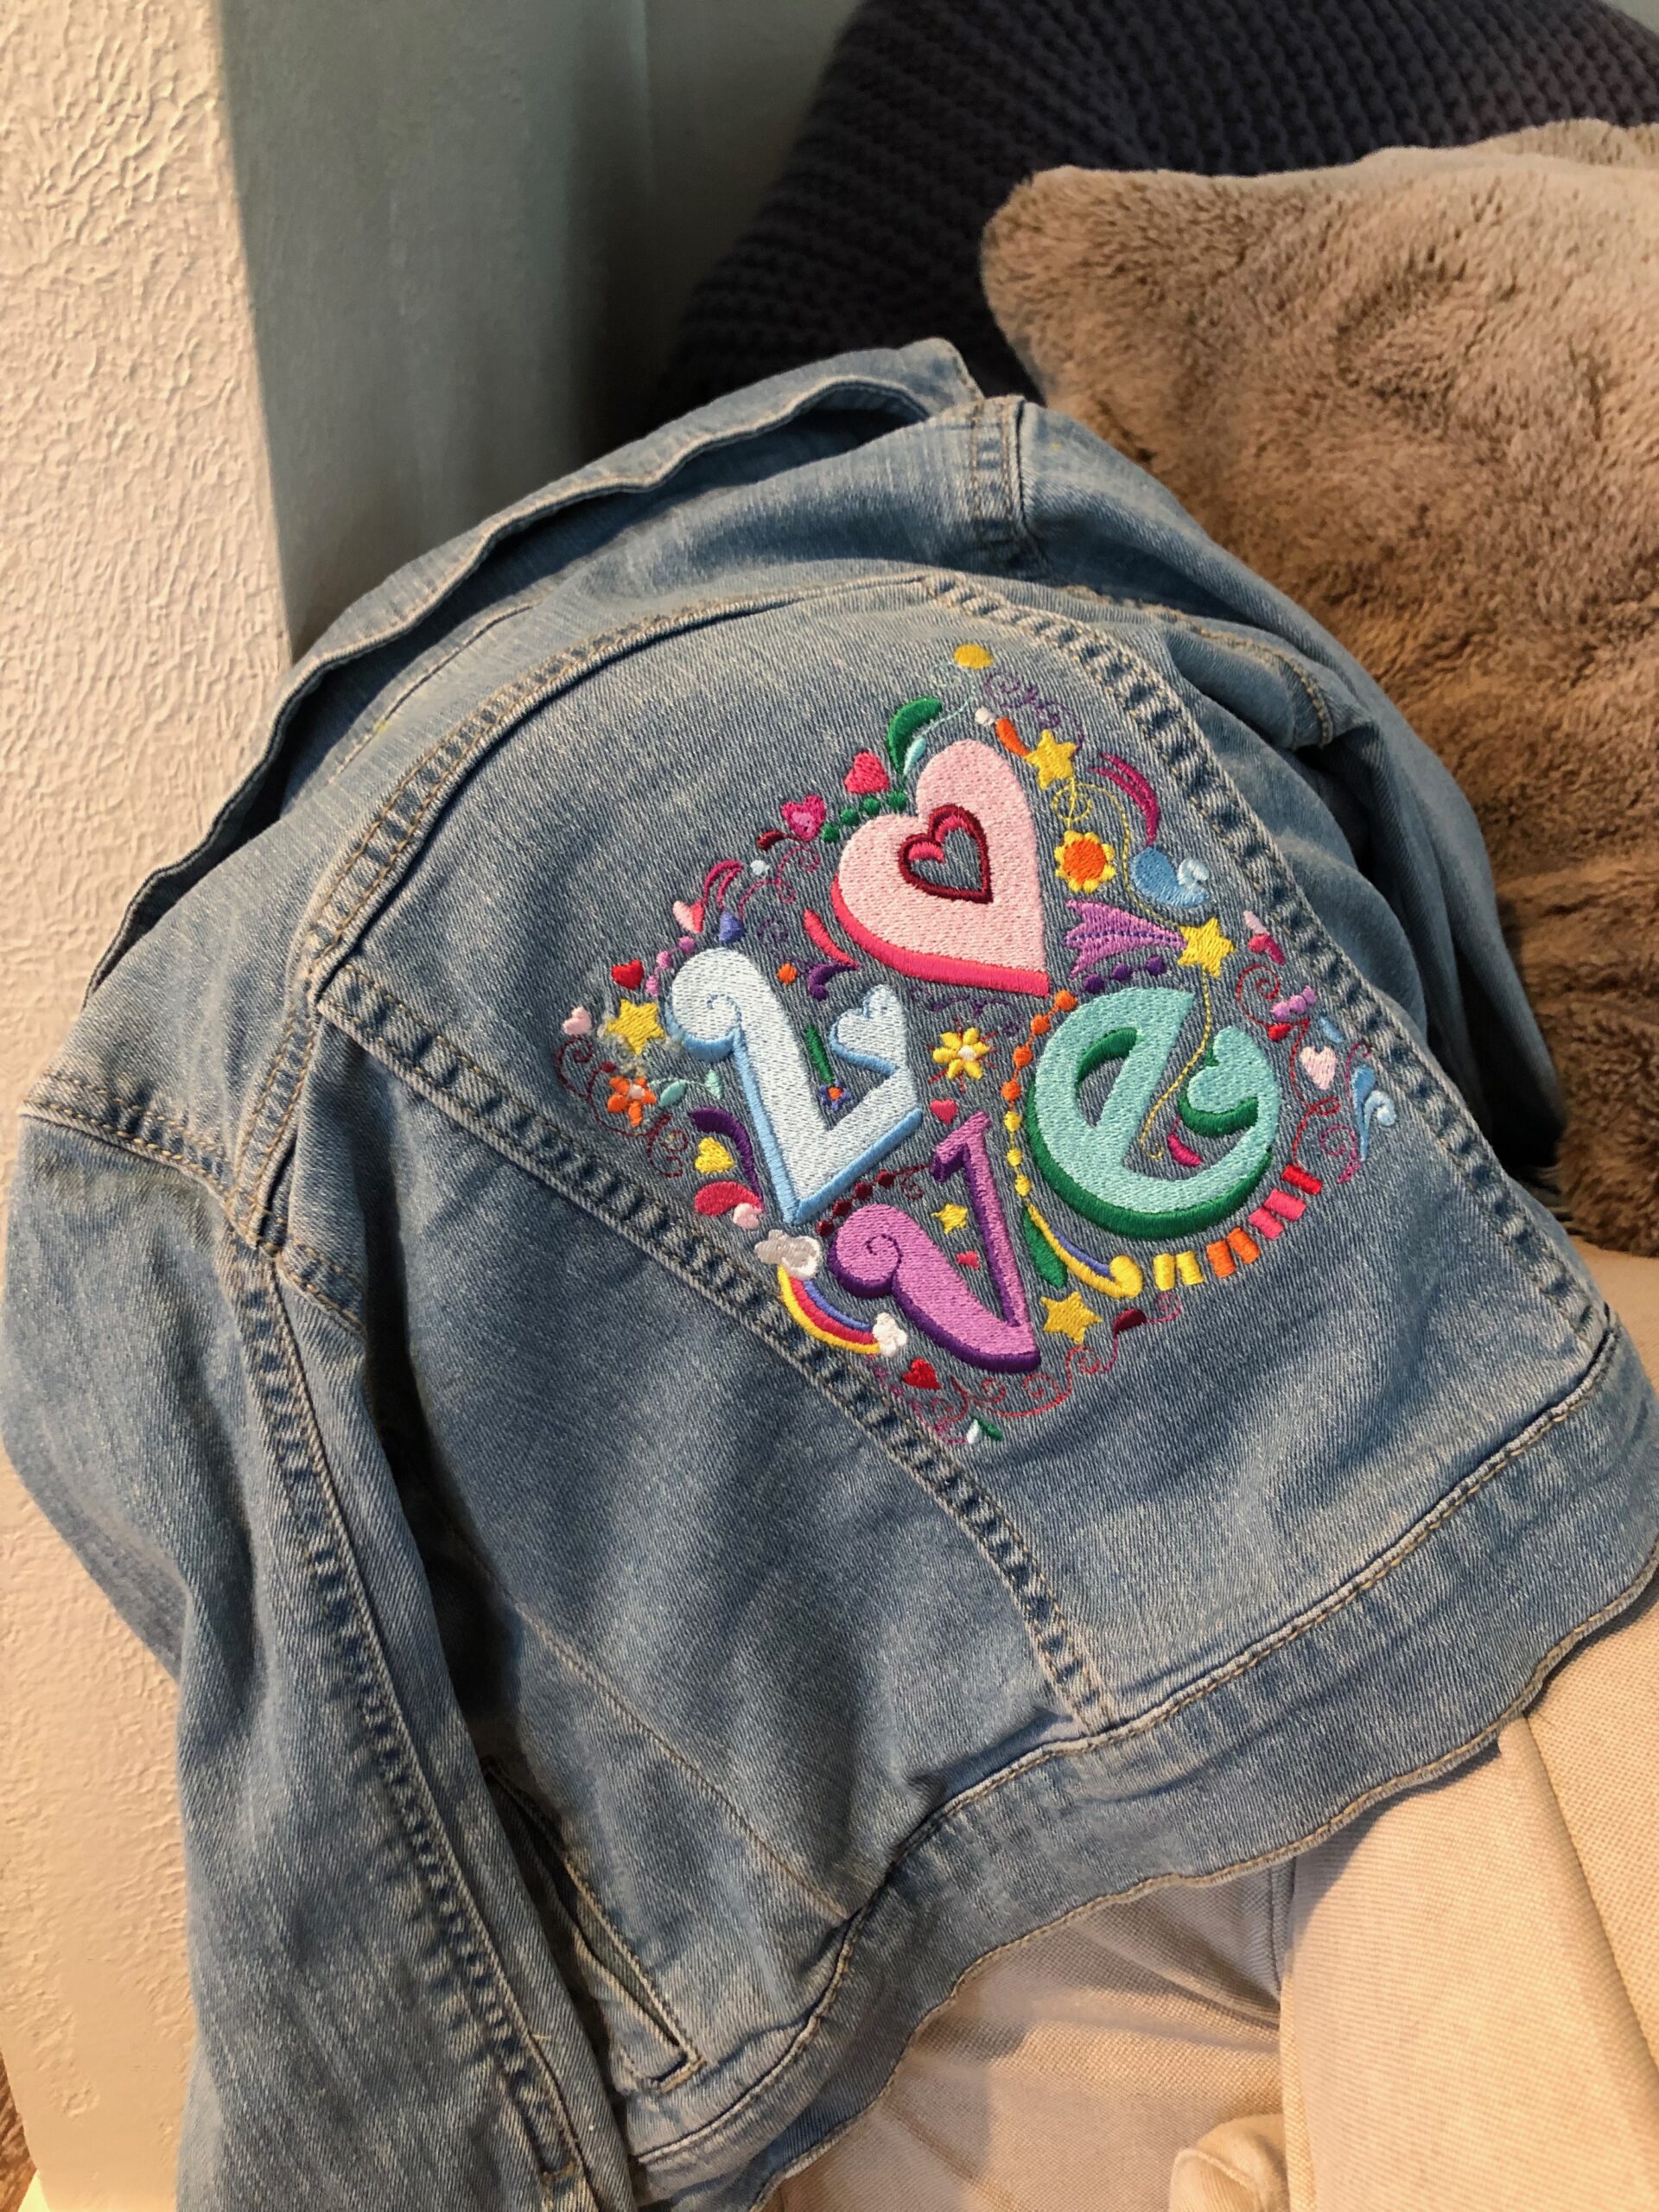 How to paint your own denim jacket in 6 steps